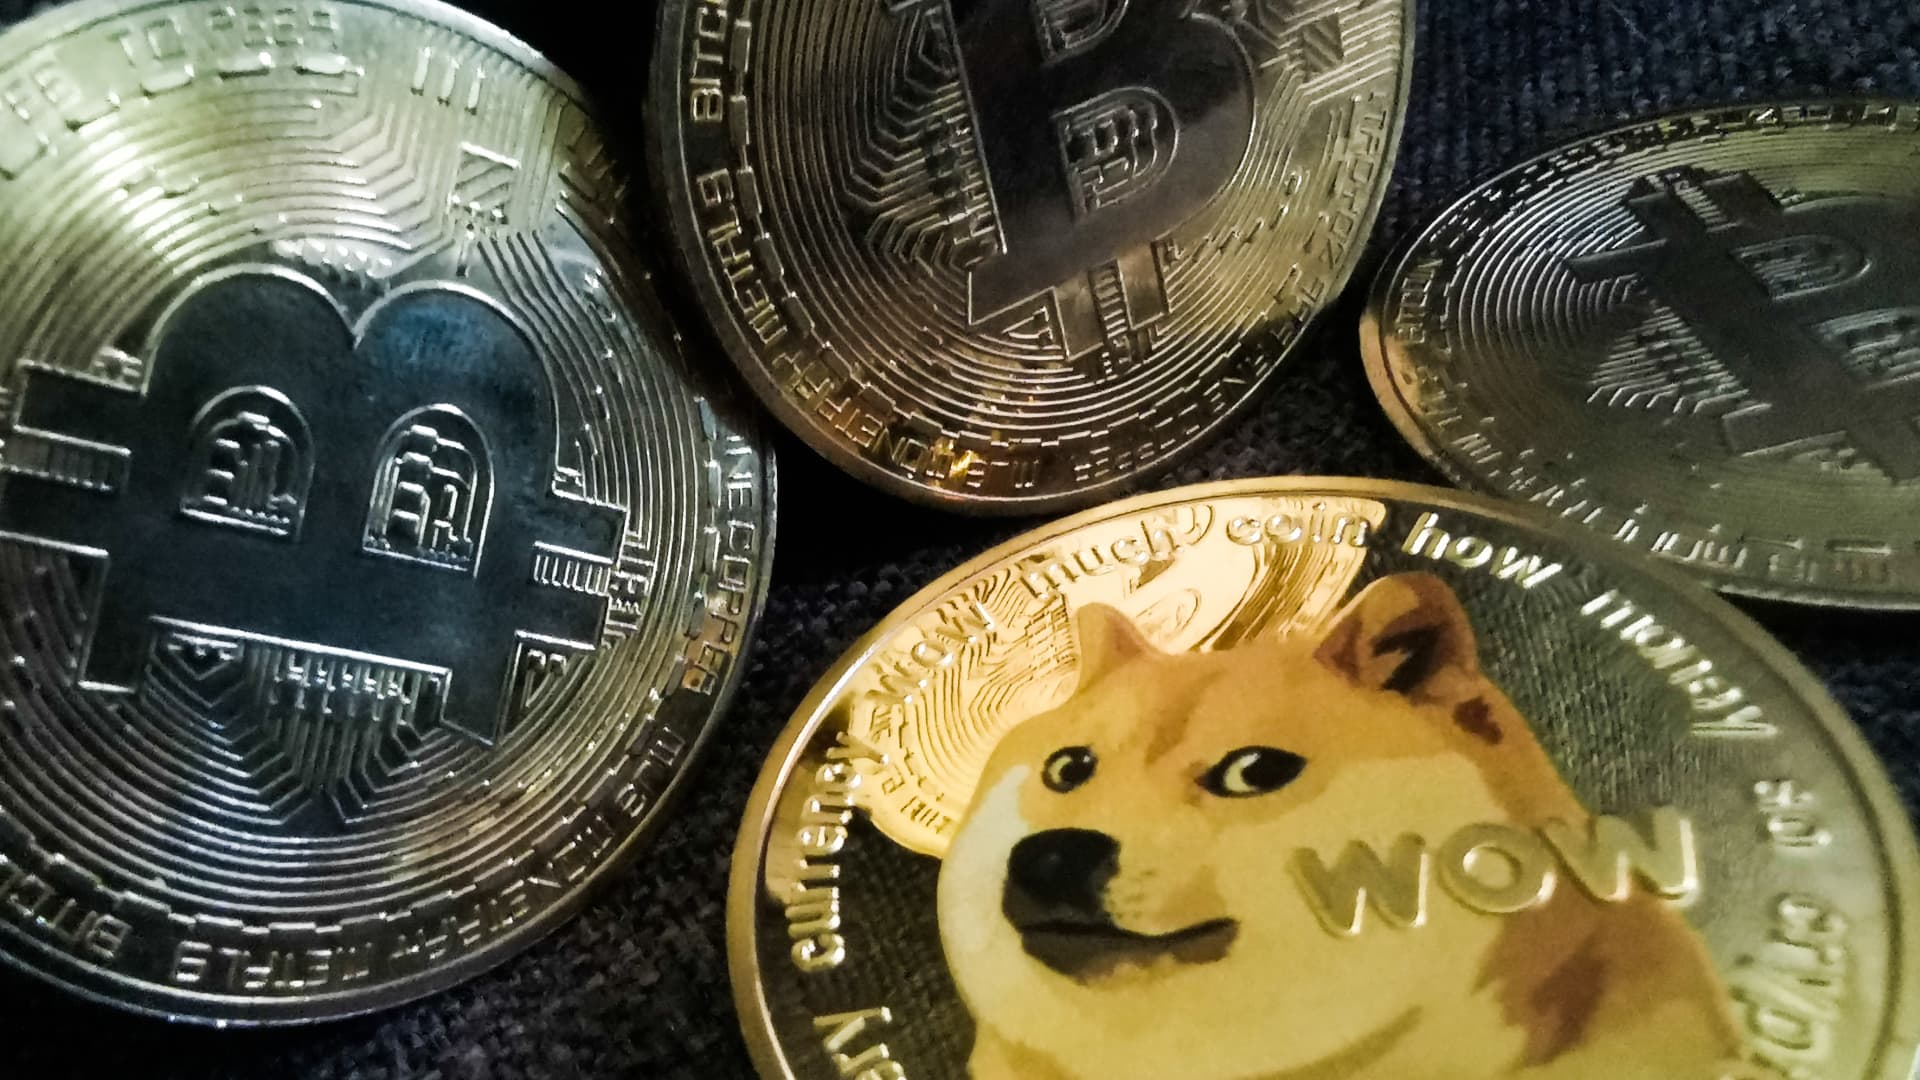 Dogecoin jumps more than 30% after Musk changes Twitter logo to image of shiba inu